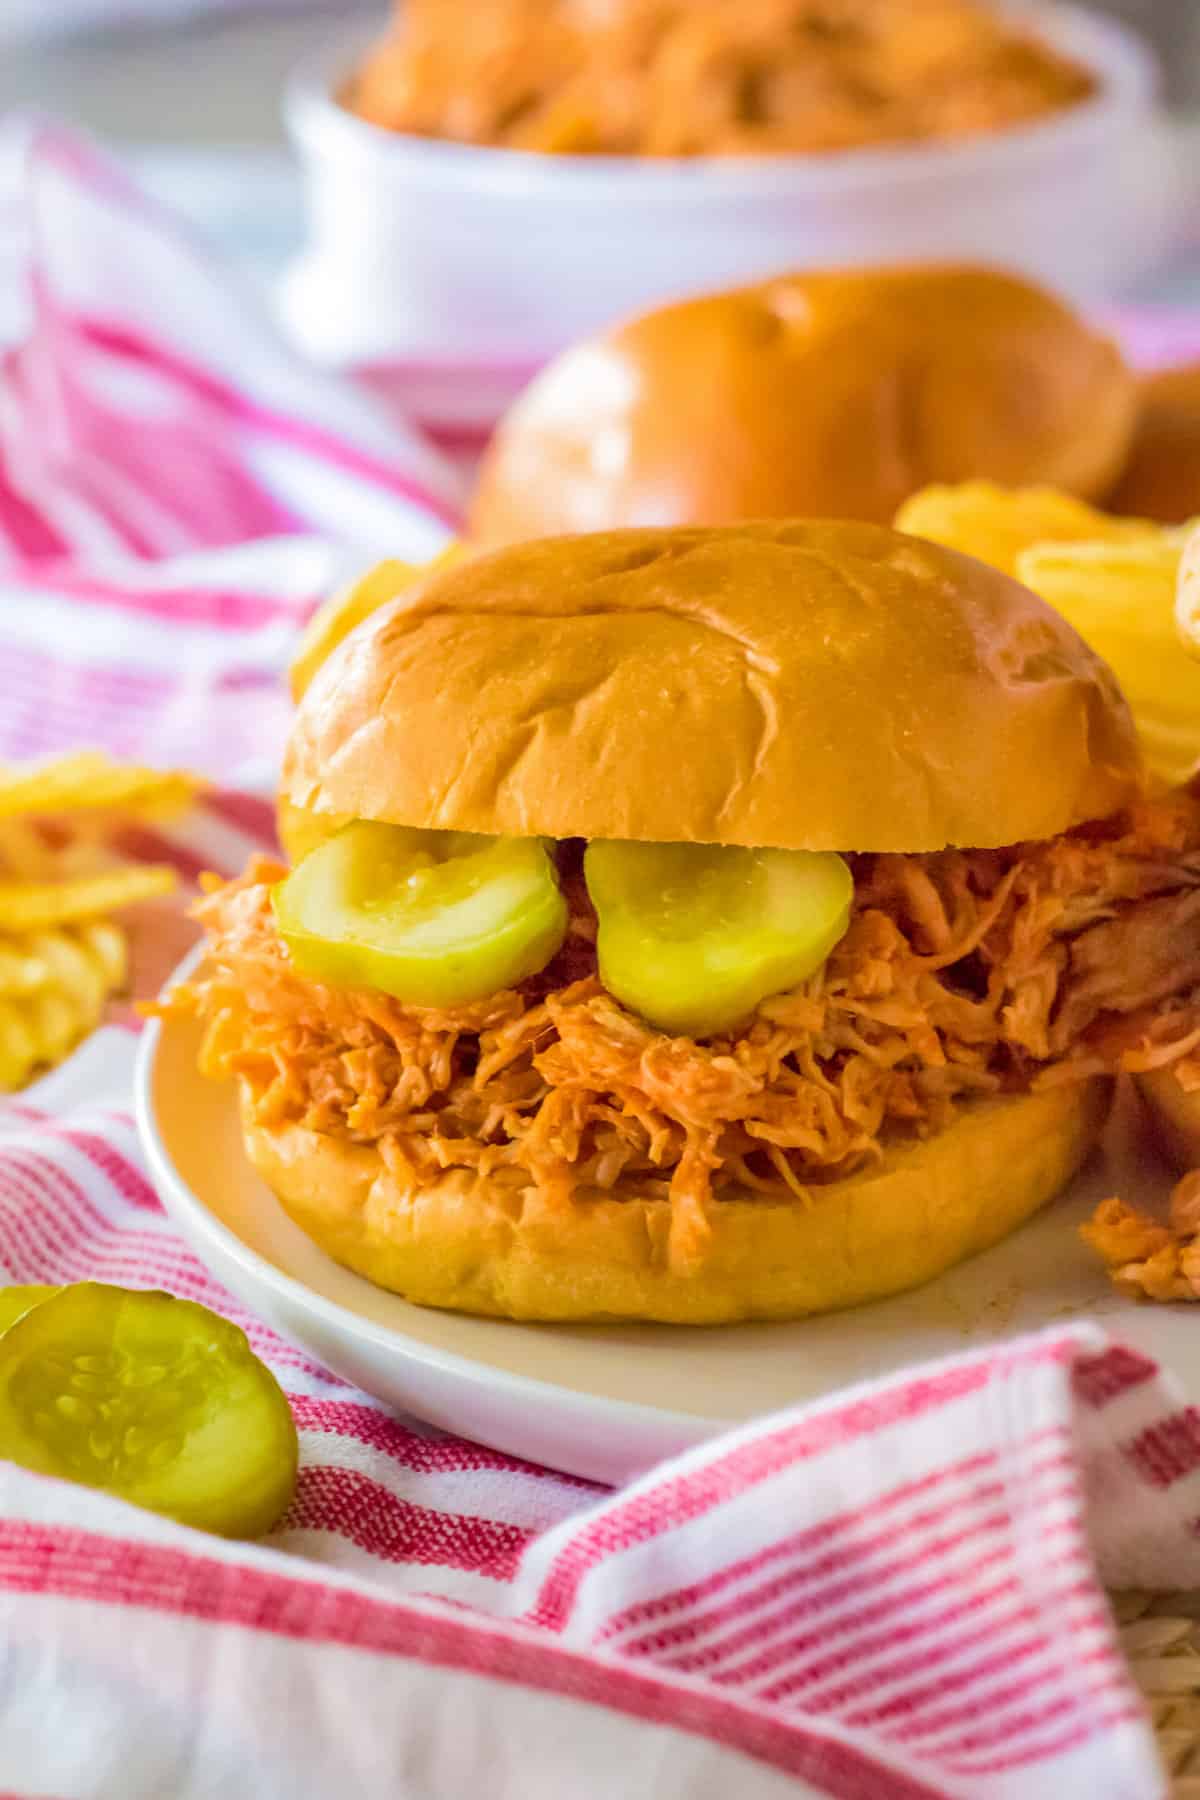 Slow cooker hot honey chicken sandwich served on a soft bun with pickles and chips.